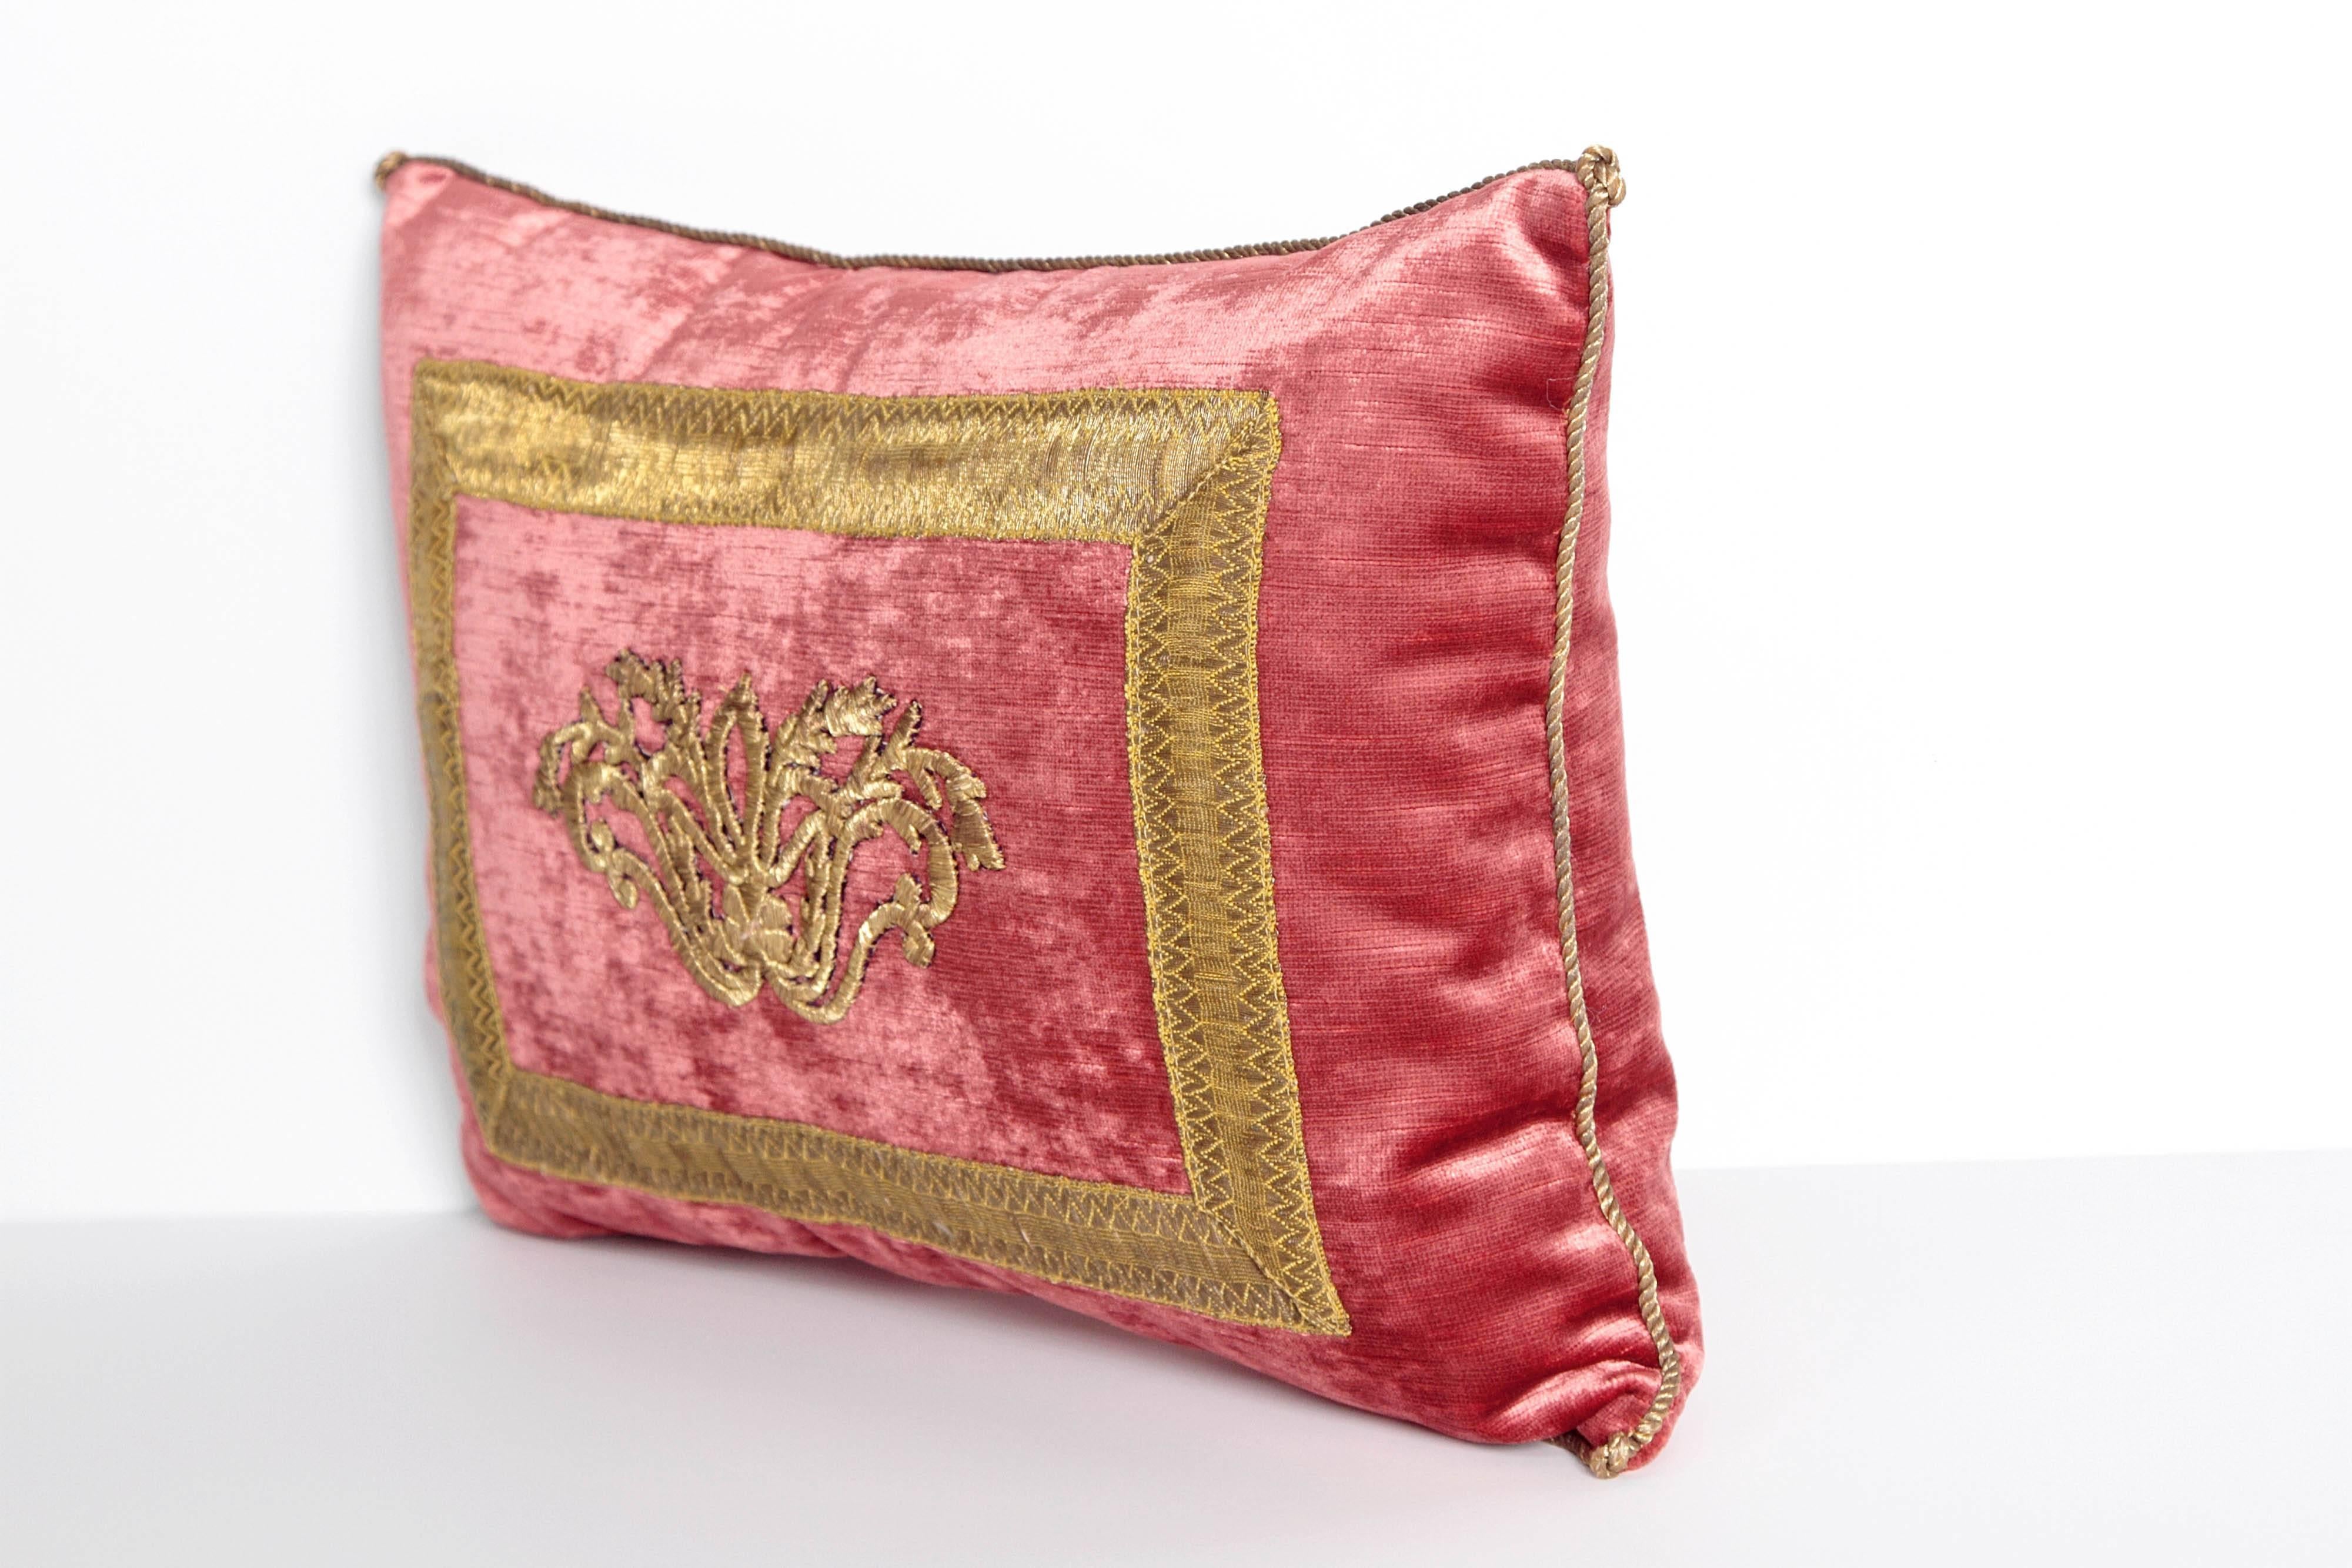 A pillow of antique Ottoman Empire raised gold metallic embroidery framed with antique gold metallic galloon on faded red velvet fabric, hand trimmed with vintage gold metallic cording knotted in the corners, down filled.